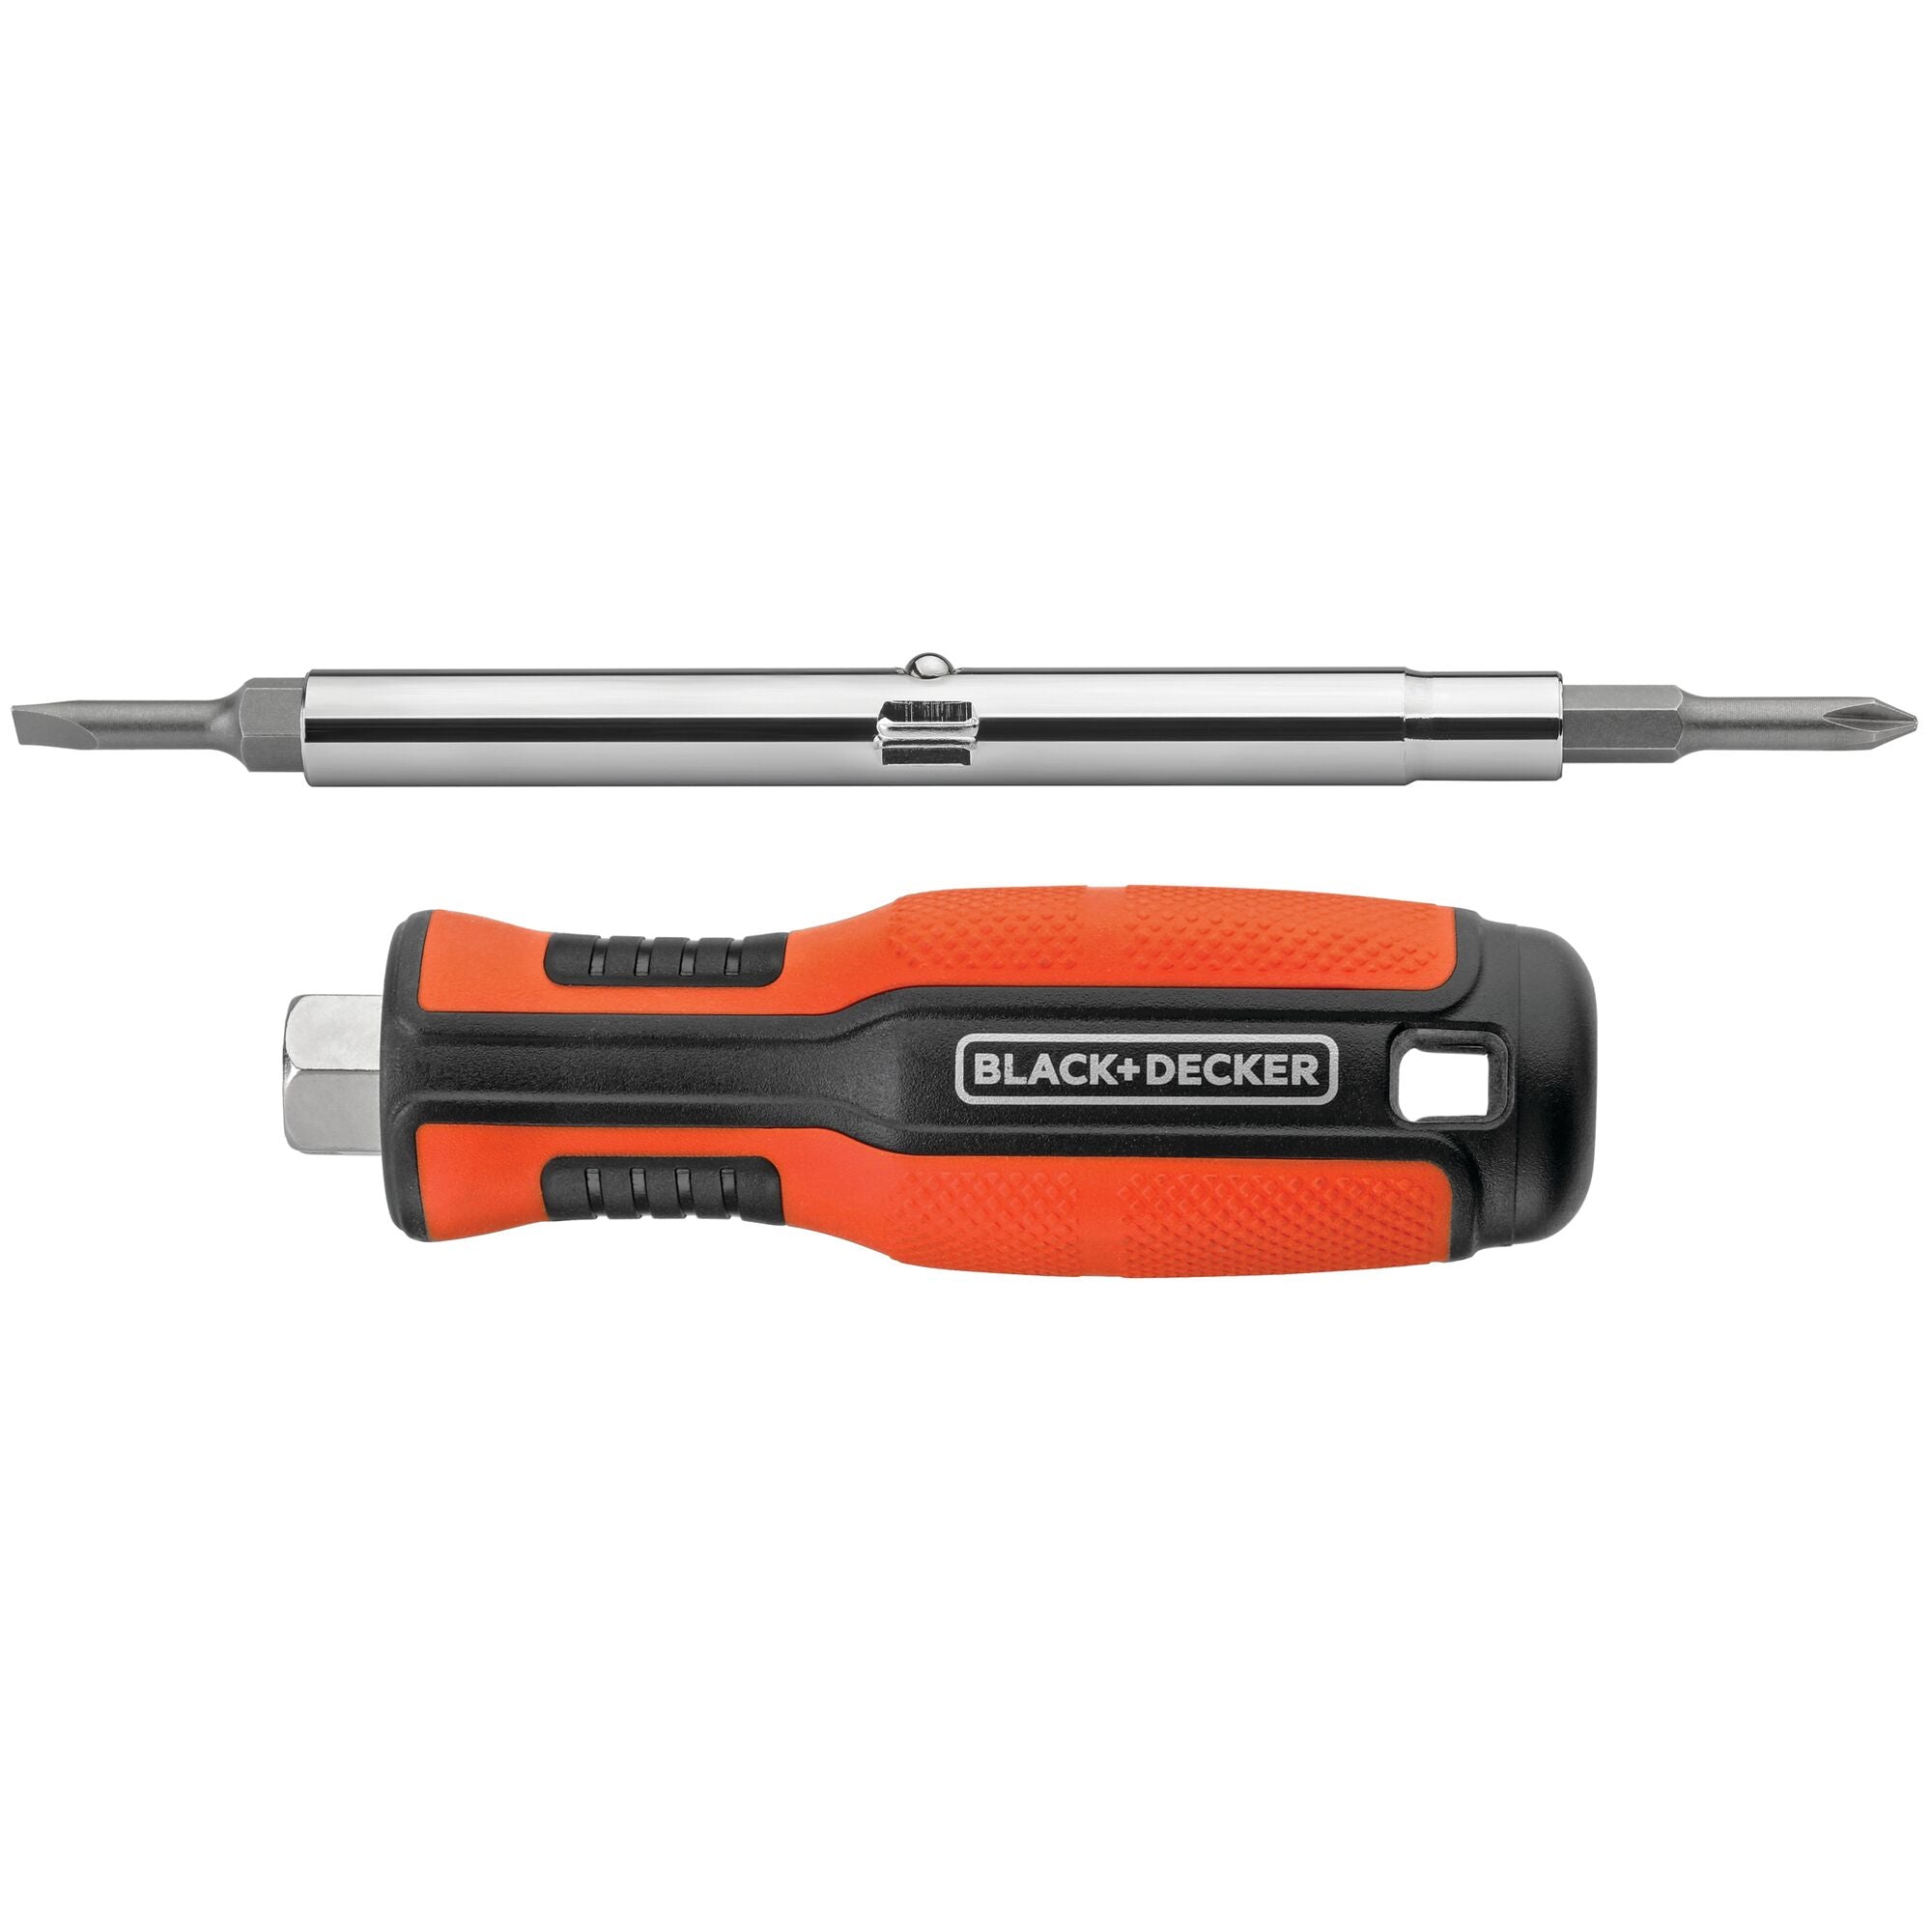 Profile of beyond by black and decker 6 in 1 multi bit screwdriver.